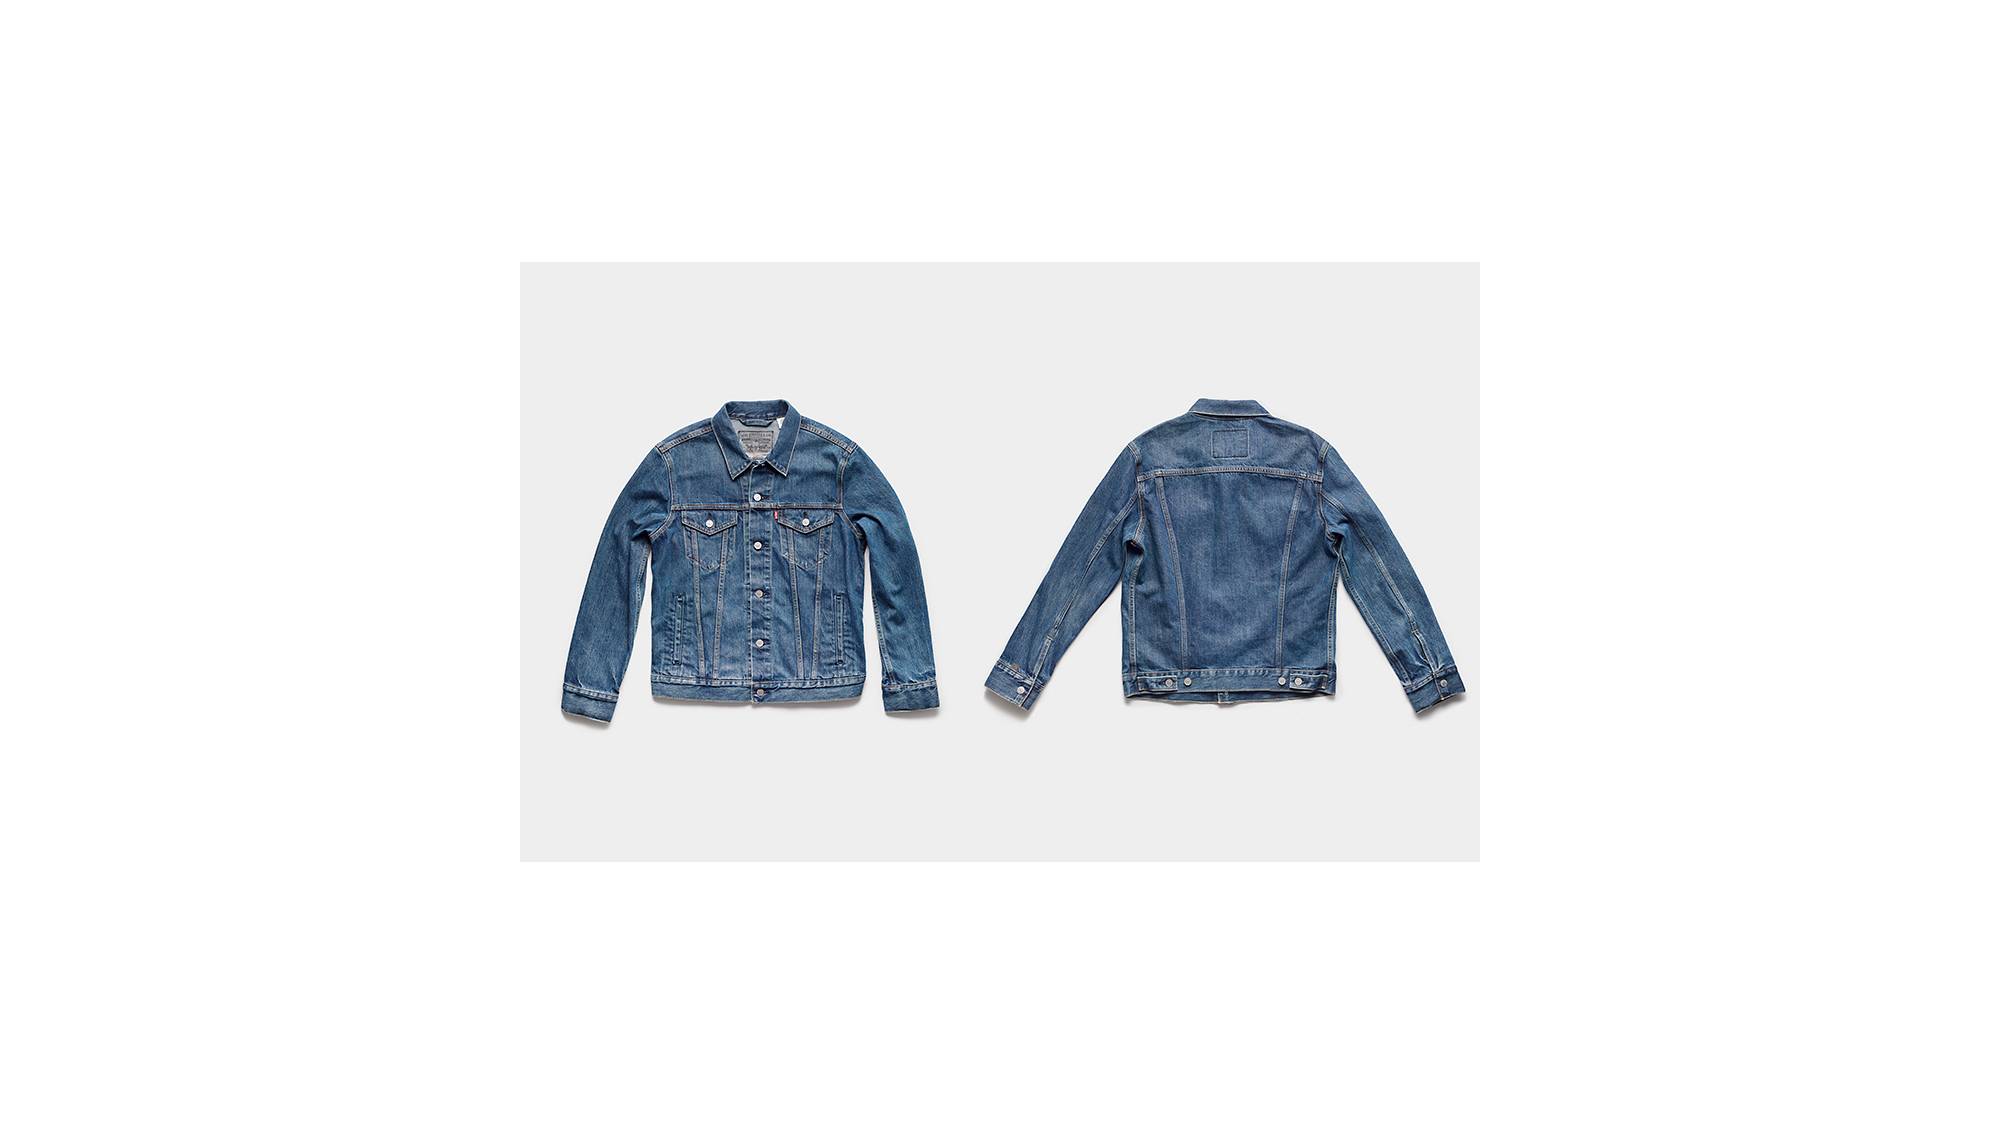 Levi's accessorizes new smart jackets with Google's Jacquard tag - CNET